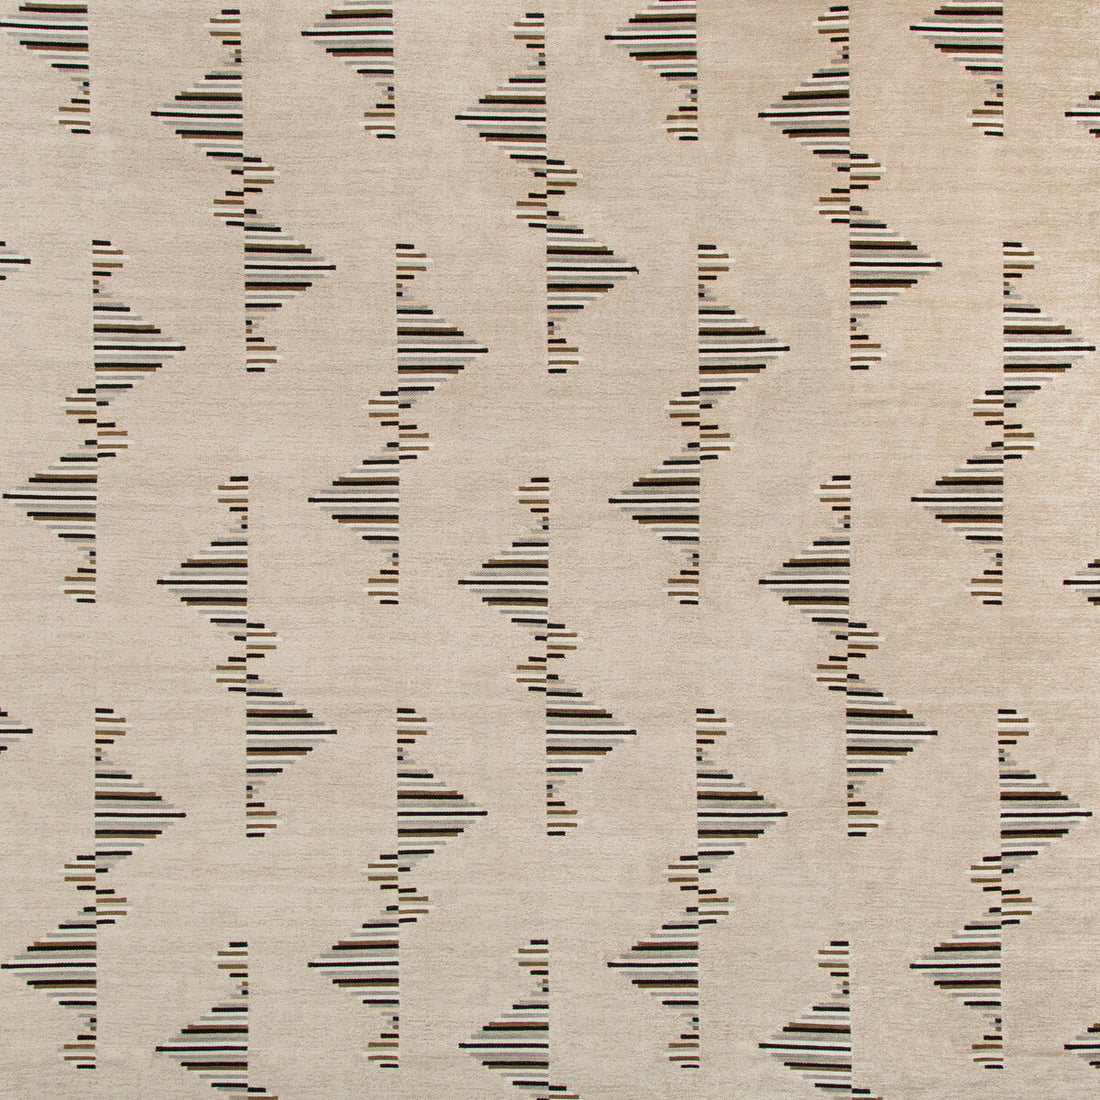 Arcade fabric in buff color - pattern GWF-3758.118.0 - by Lee Jofa Modern in the Kelly Wearstler V collection